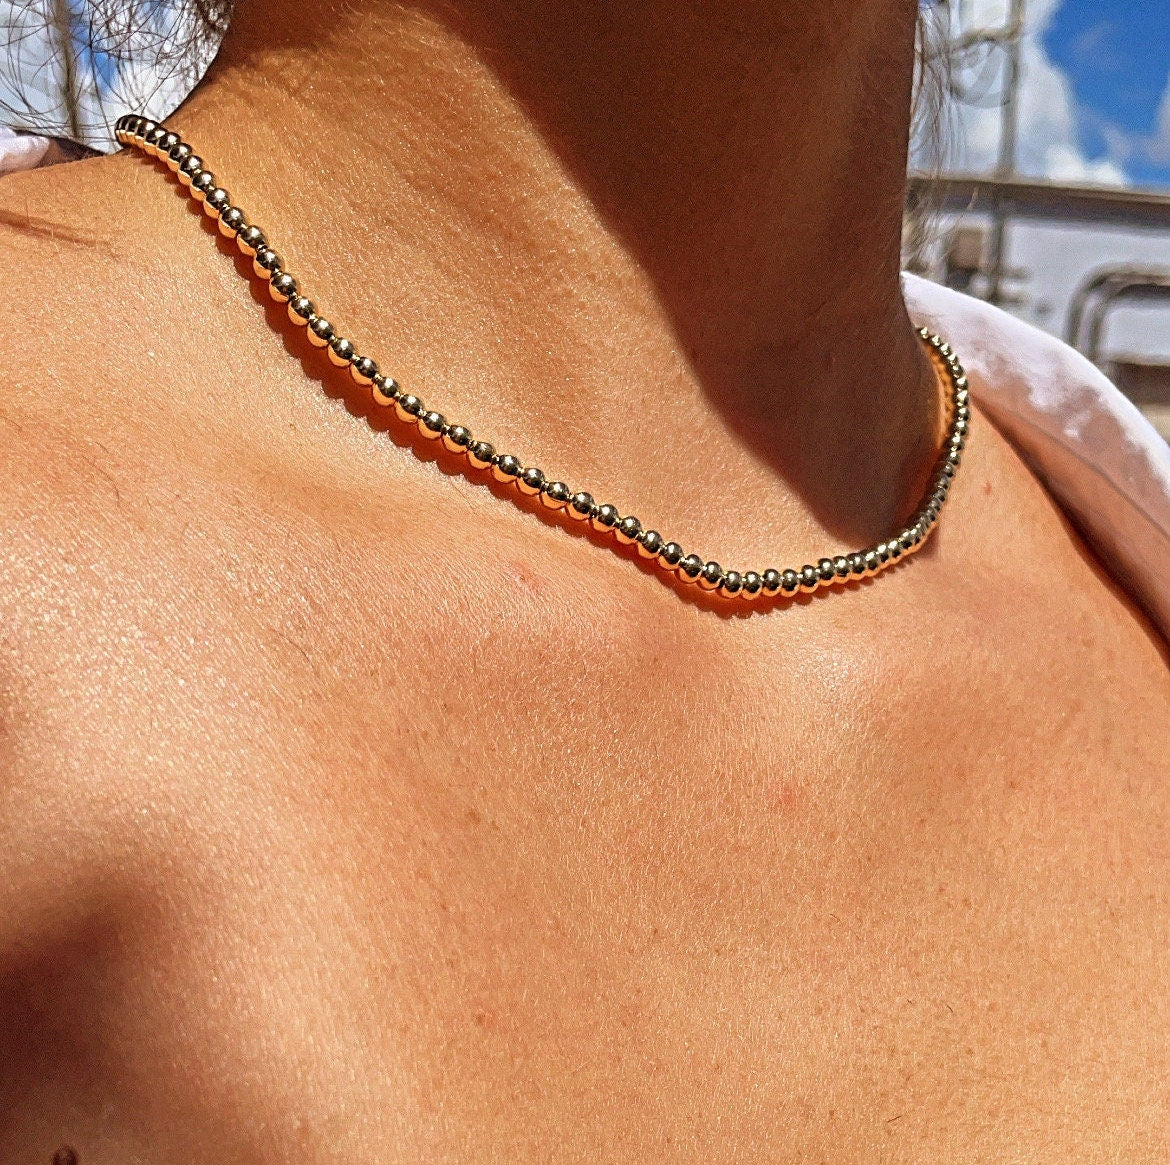 Multi-Strand Chain and Bead Necklace - How Did You Make This? | Luxe DIY